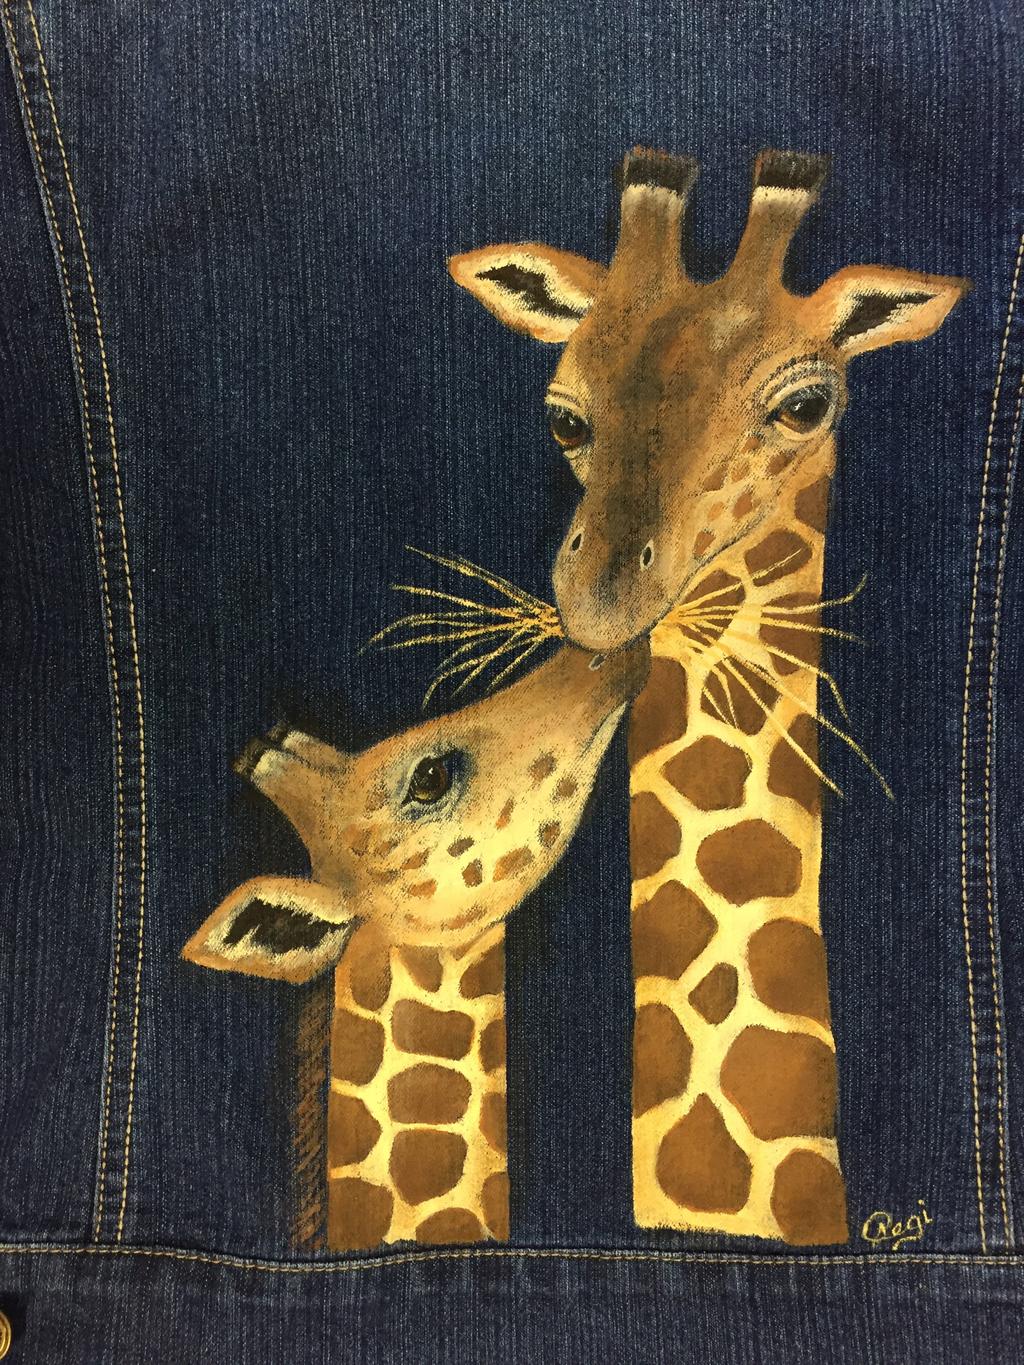 February Workshop by Pegi Roberts UPCOMING WORKSHOPS PROJECT SNEAK PEEK March April May Thank you all for signing up for the February workshop MAMA GIRAFFE AND BABY - design by Lydia Steeves - taught